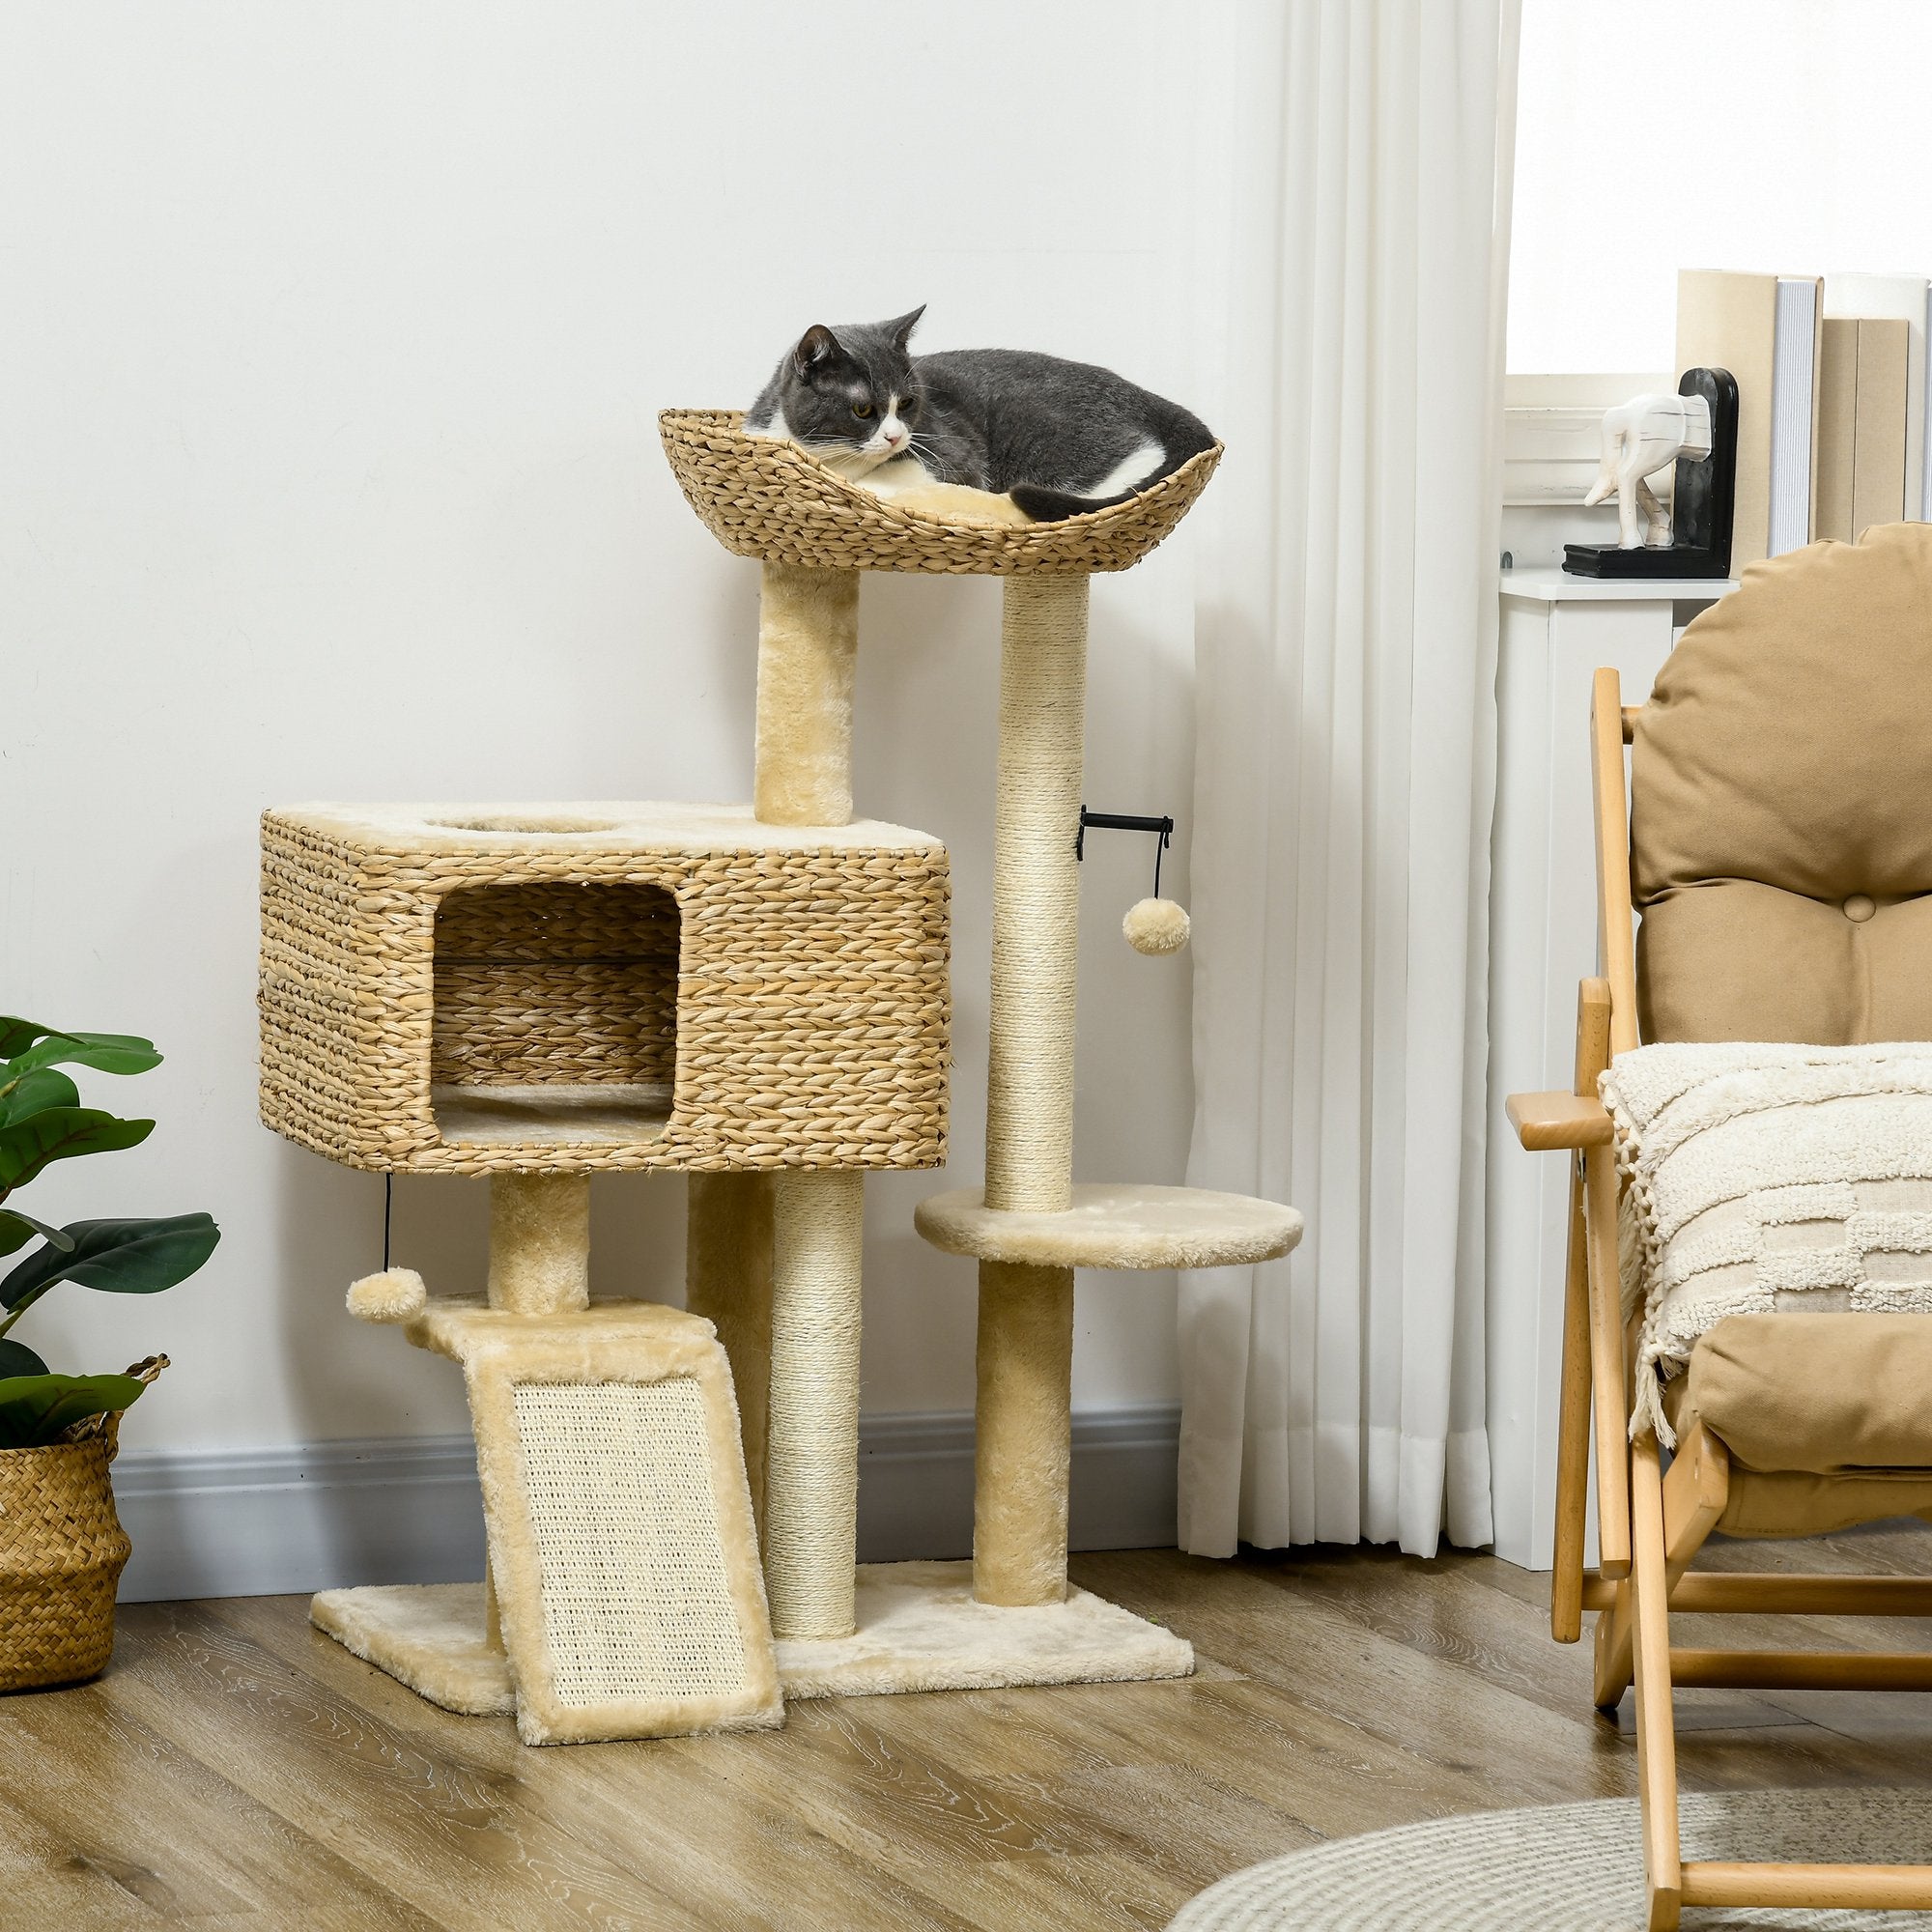 95cm Cat Tree Tower for Indoor Cats, with Scratching Post, Cat House, Toy Ball, Platform - Beige, PawHut,